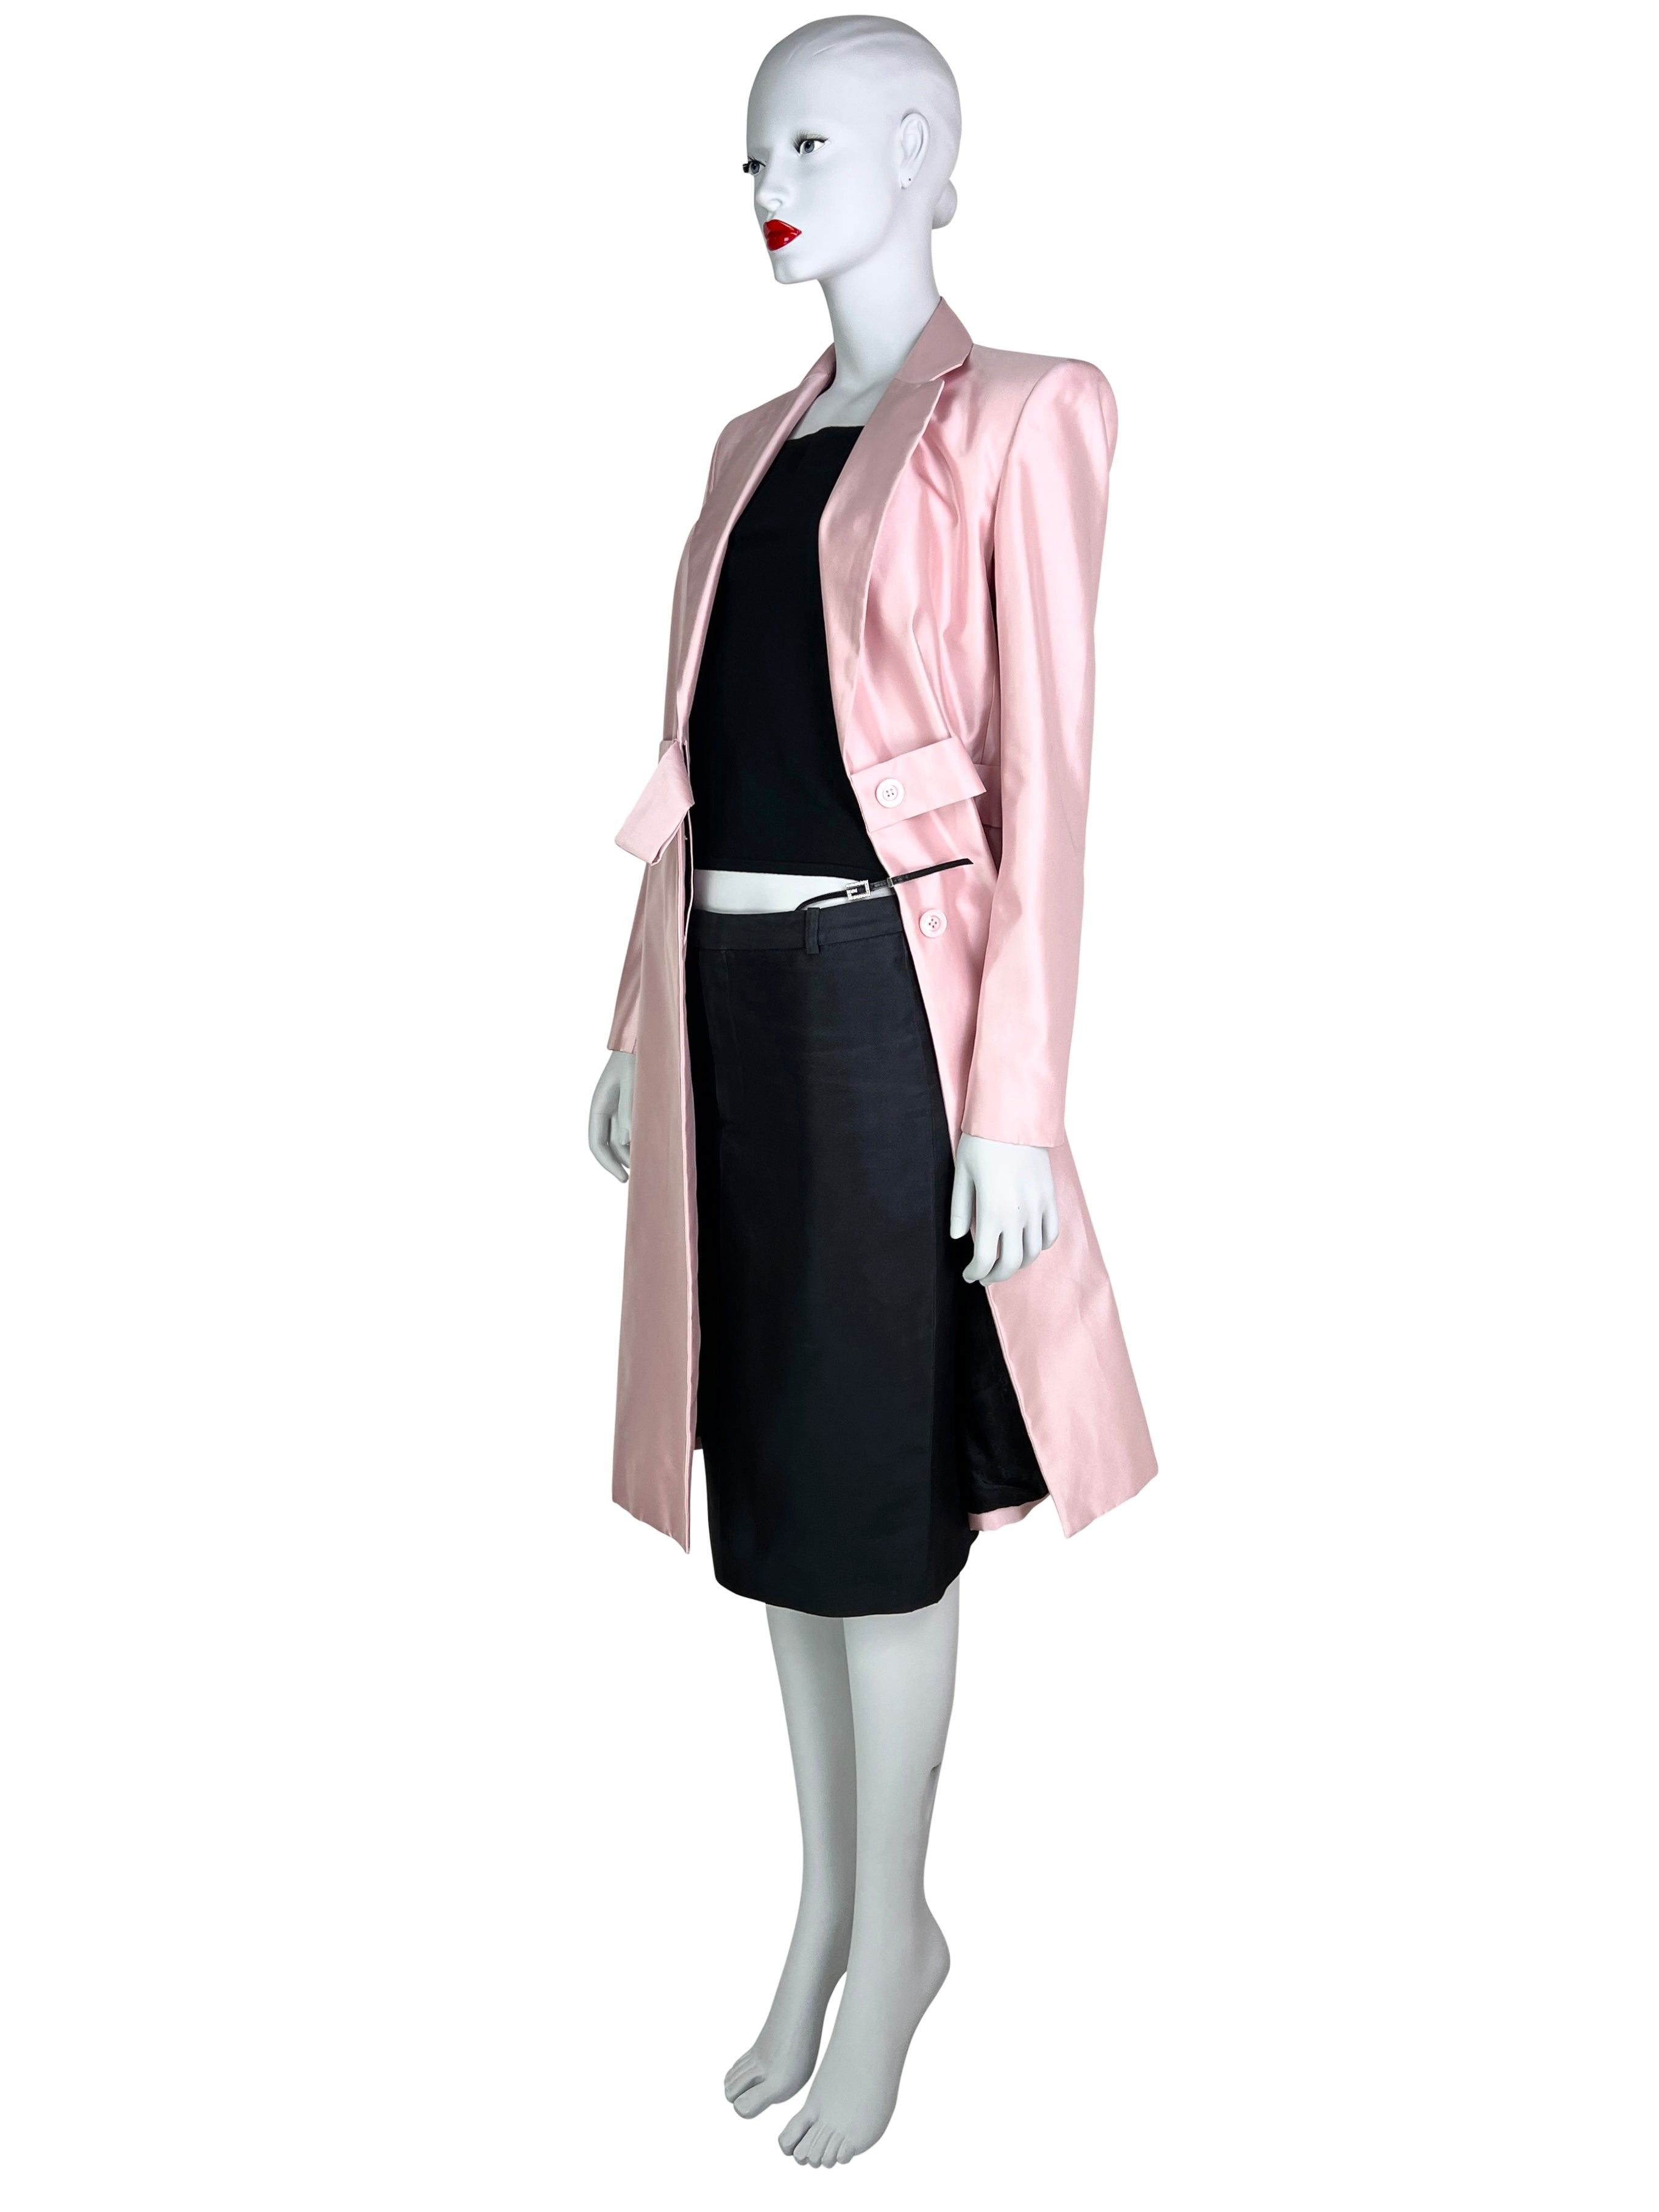 Gucci Spring 1998 Silk Coat in Pink